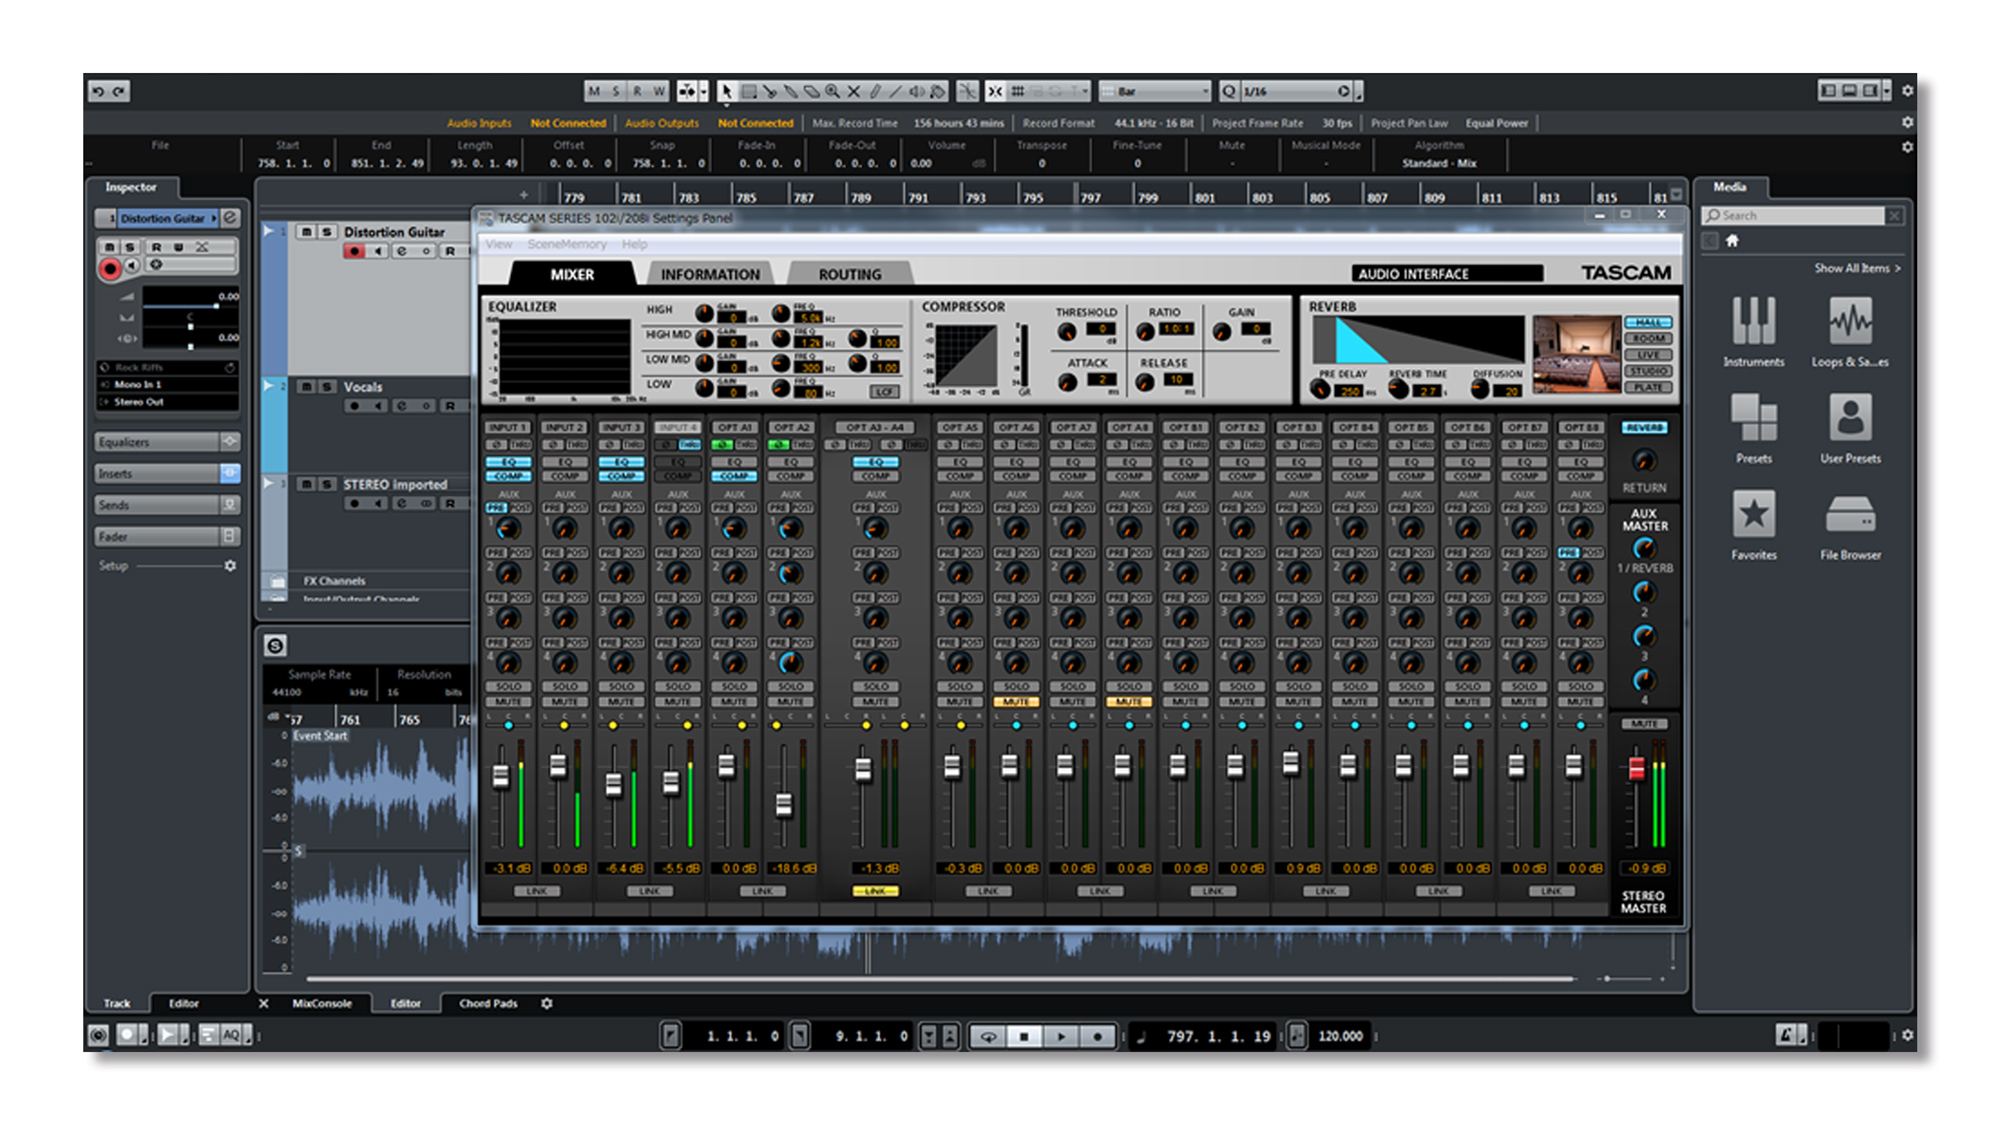 Control Software for Matrix Mixing, Effects Processors, and More